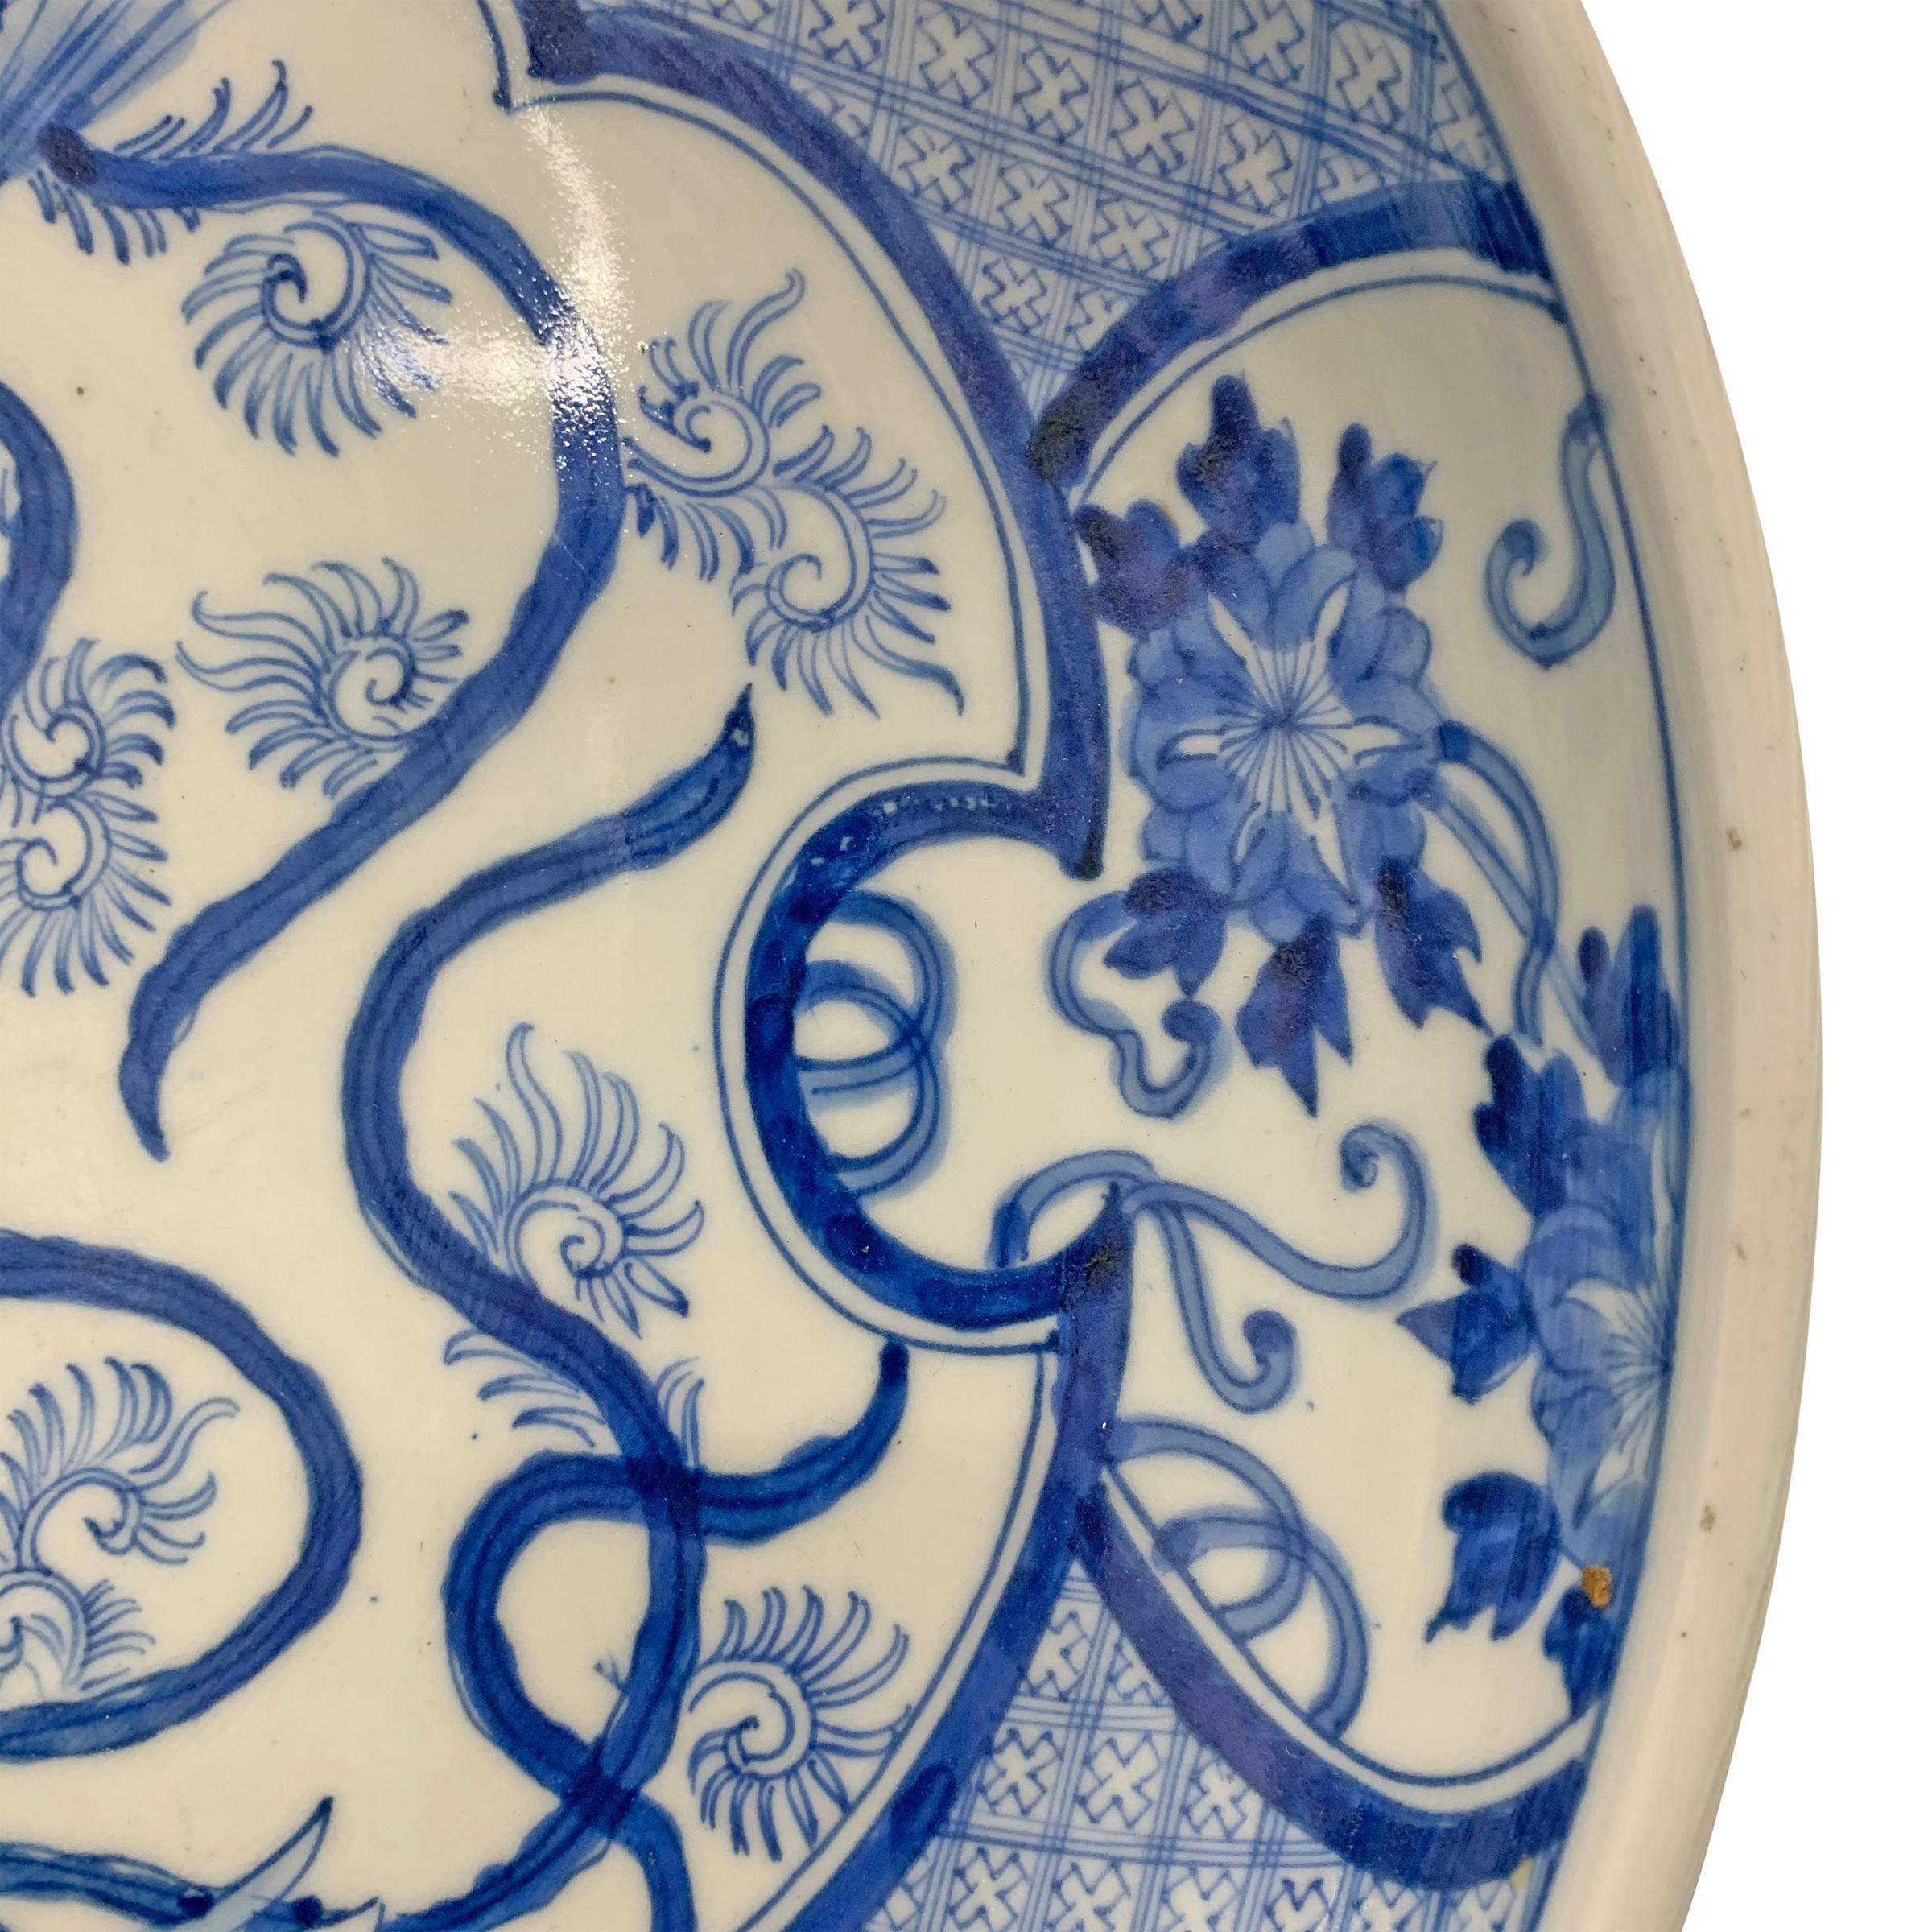 Hand-Painted Large 19th Century Japanese Blue and White Platter